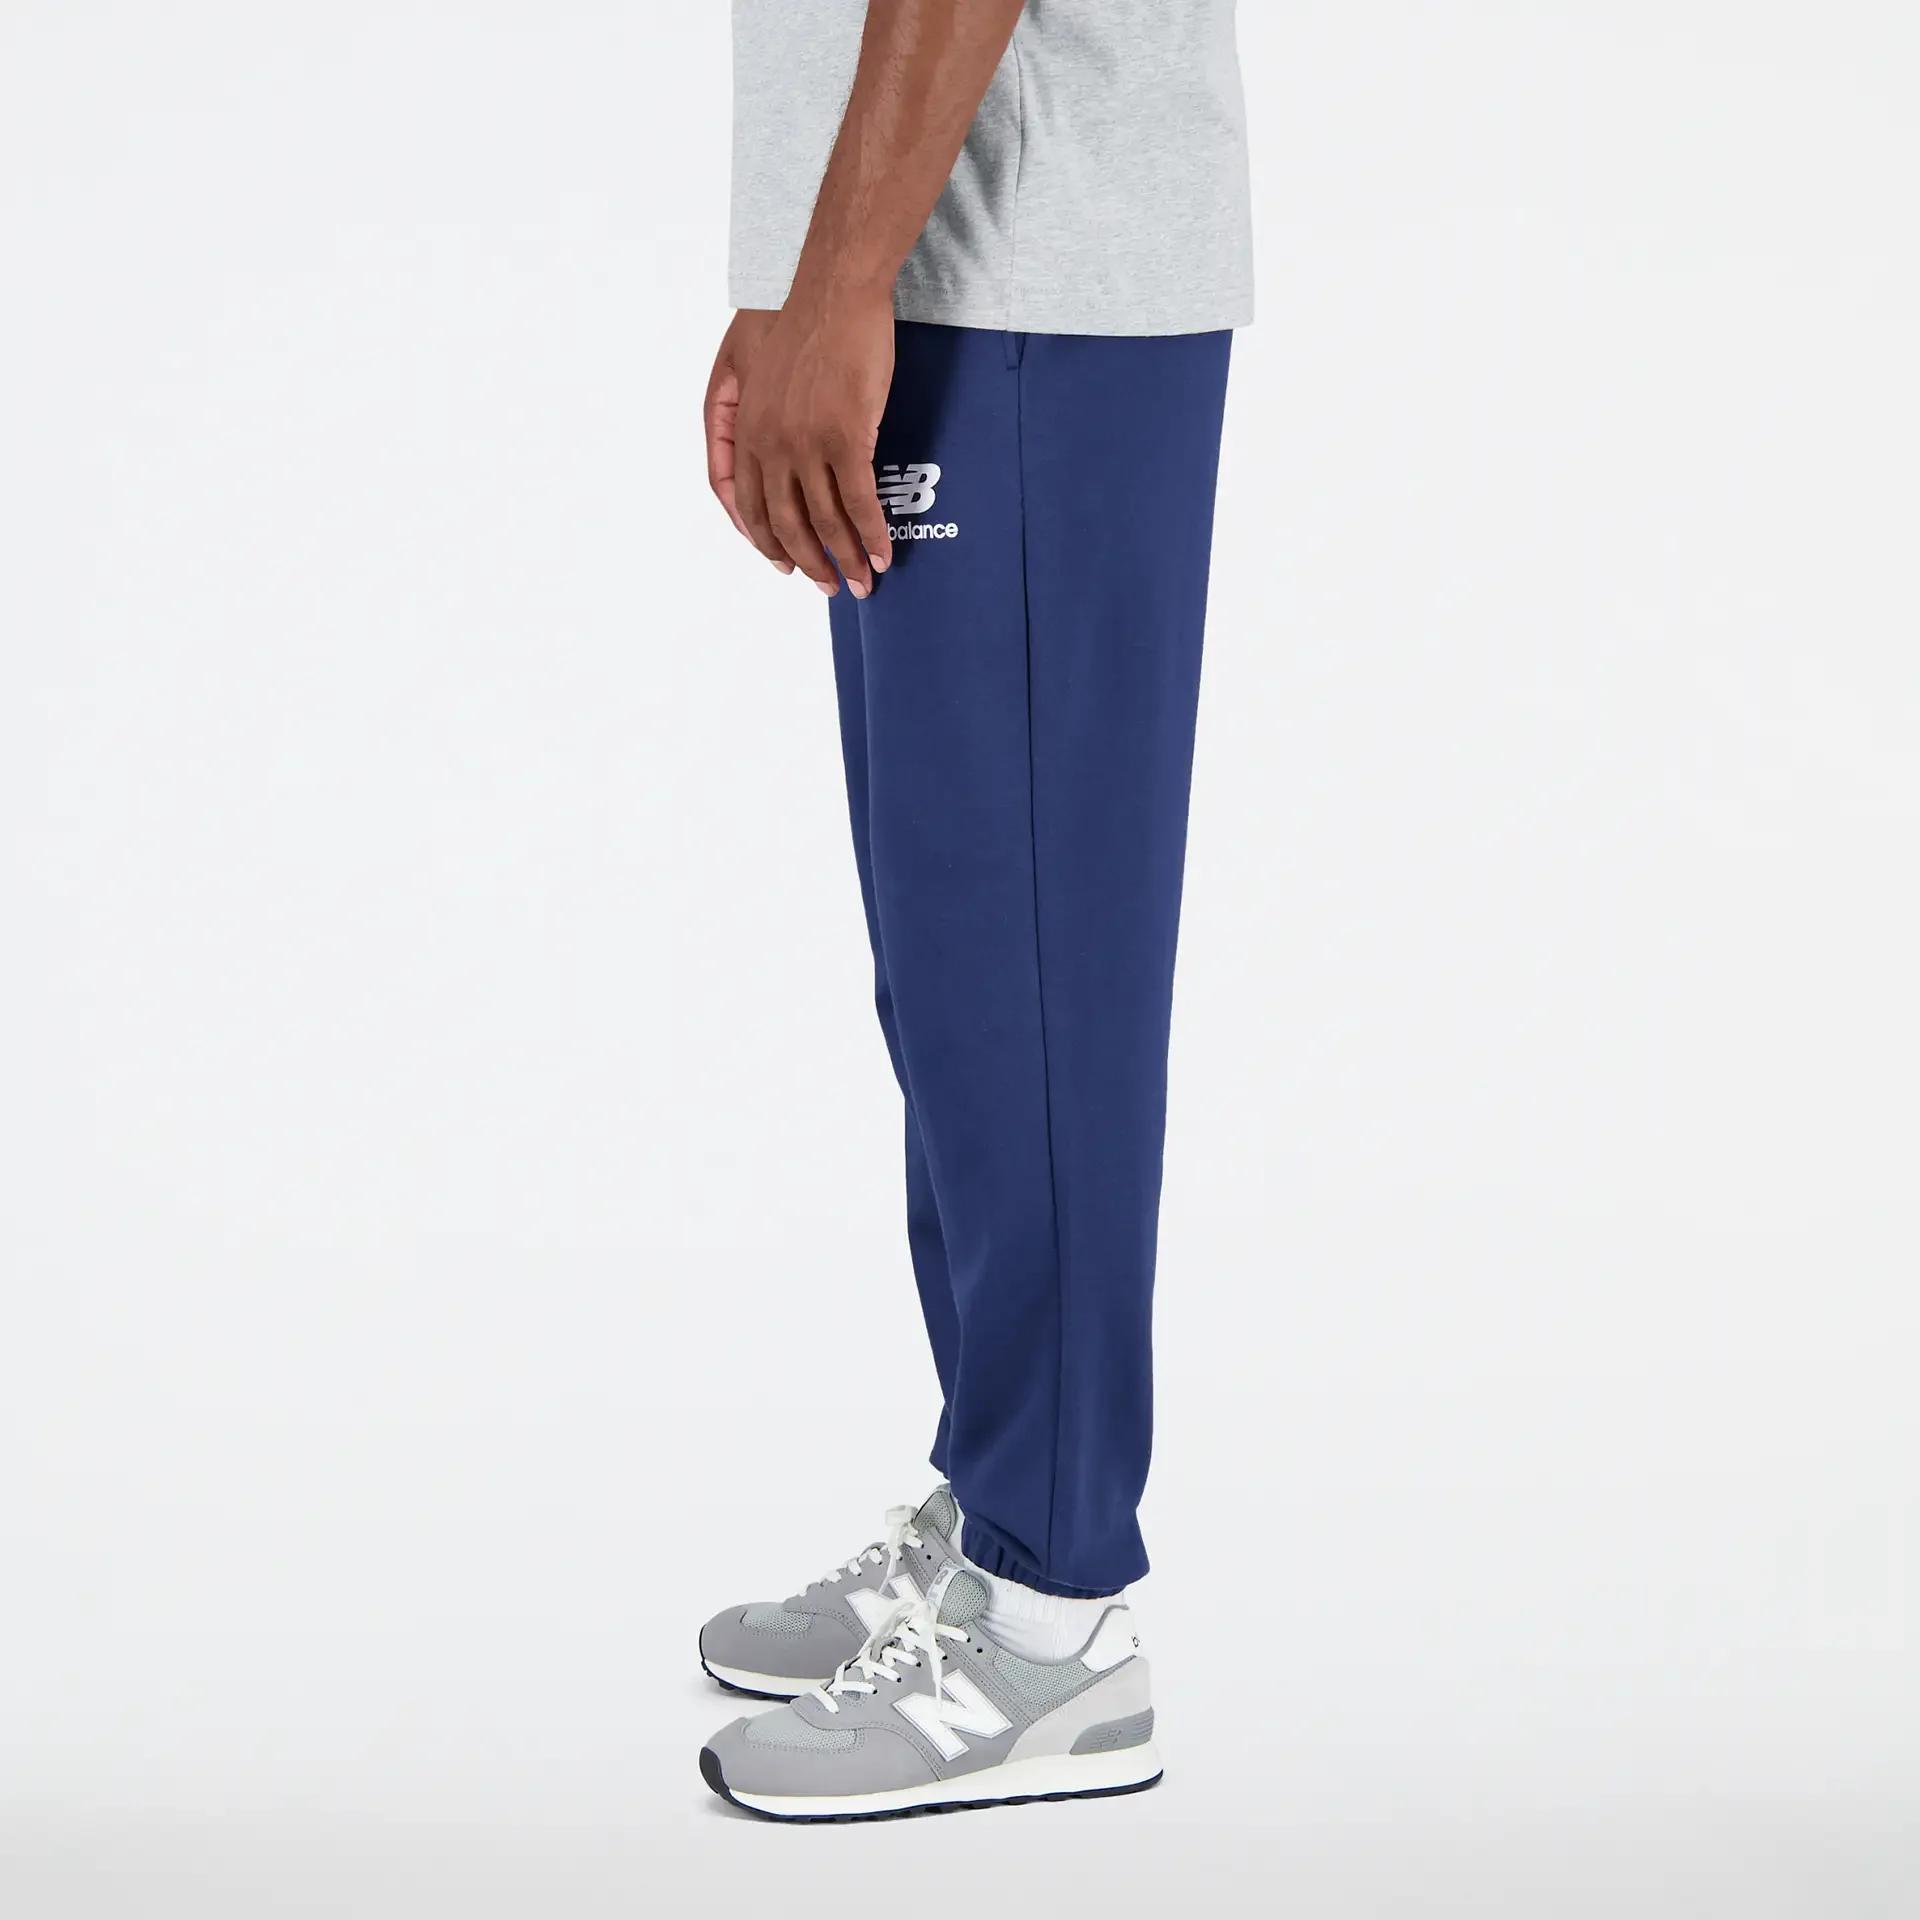 New Balance Essentials Stacked Logo French Terry Sweatpant Navy